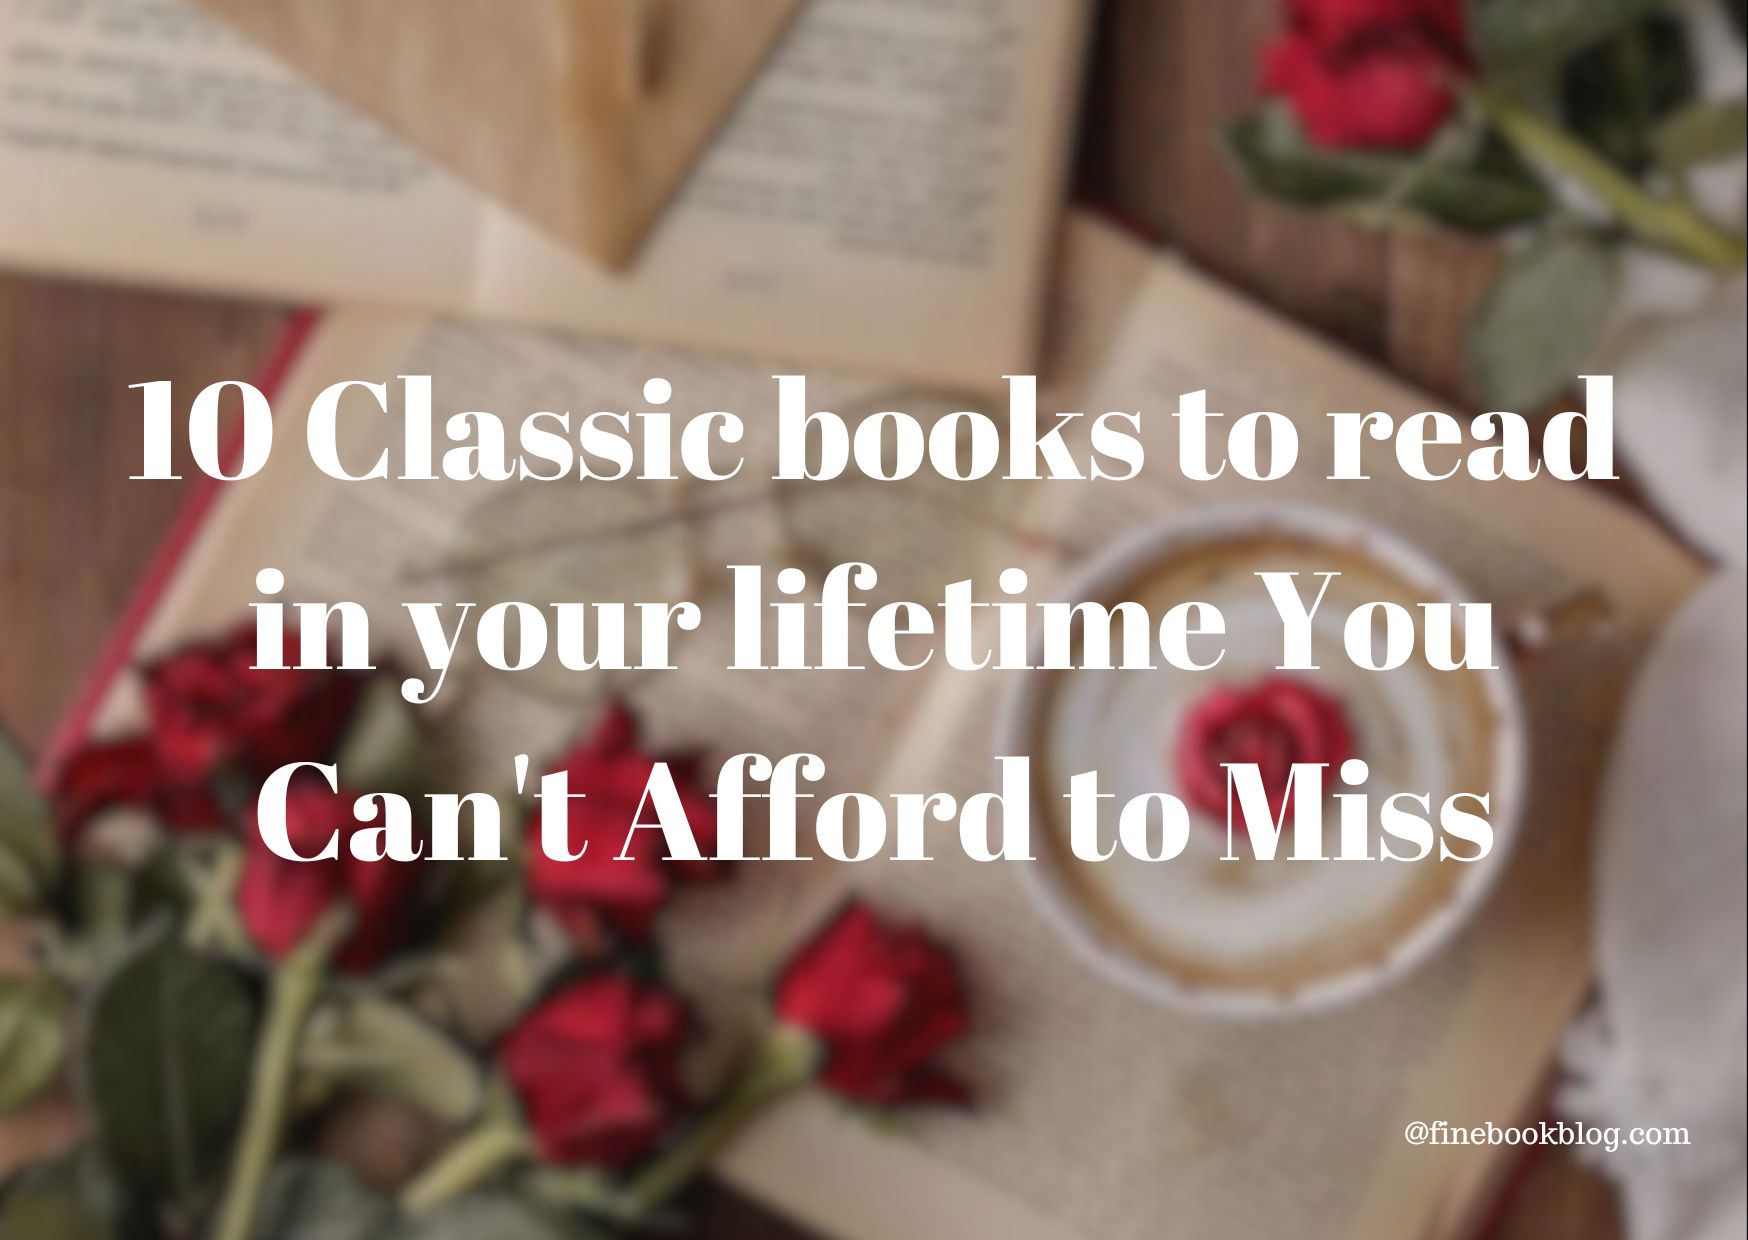 Classic-books-to-read-in-lifetime-20-women-young